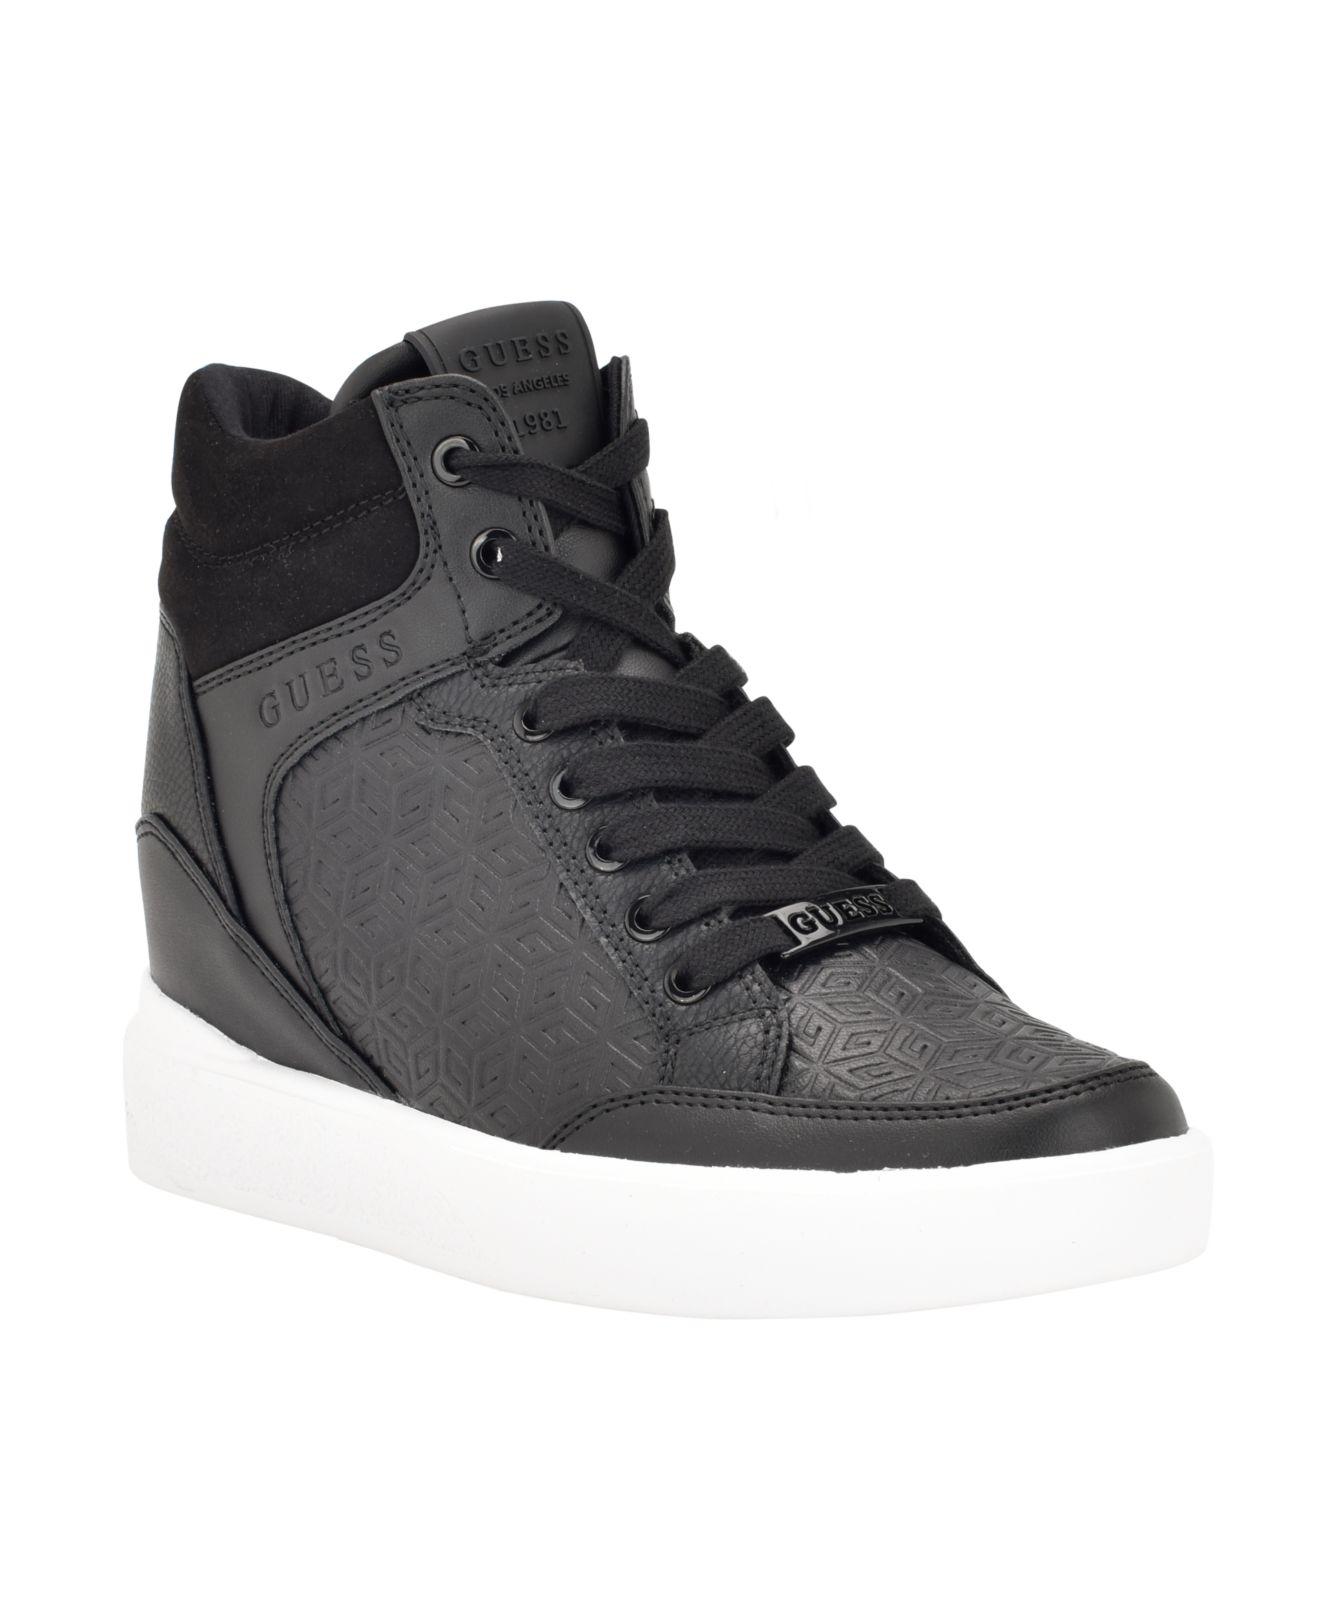 Guess Blairin Logo Hidden Wedge Lace-up Sneakers in Black | Lyst